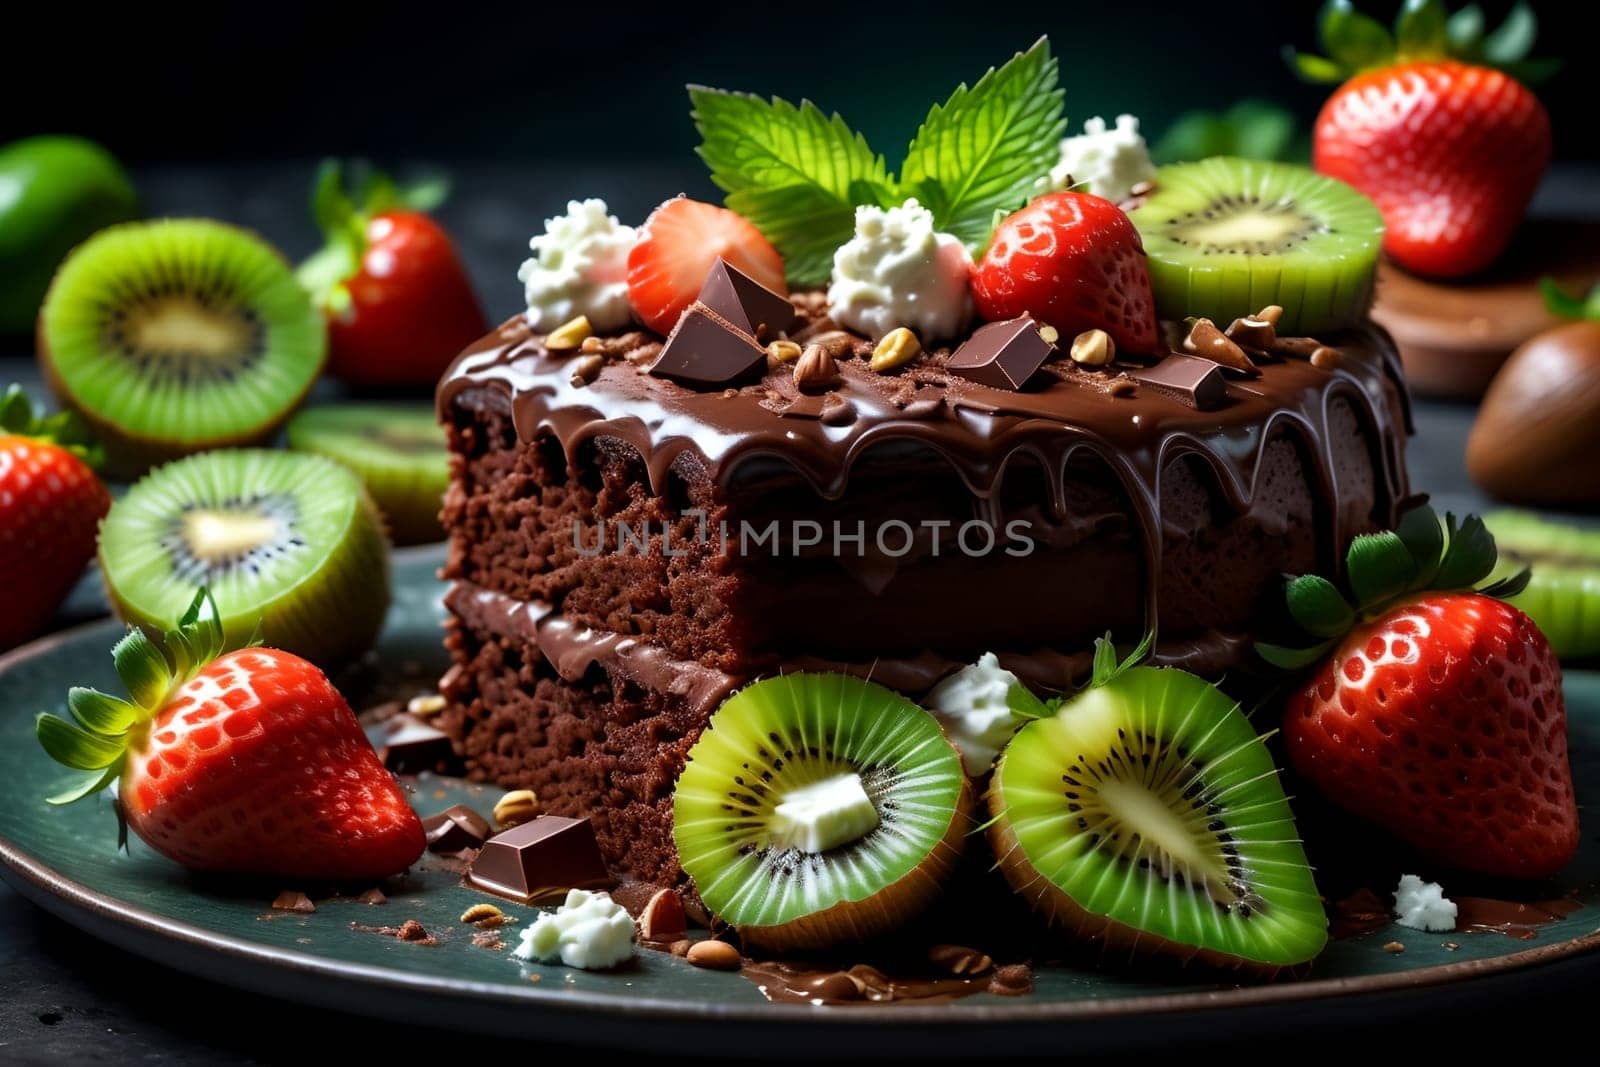 chocolate cake with strawberries, cottage cheese, fruits by Rawlik